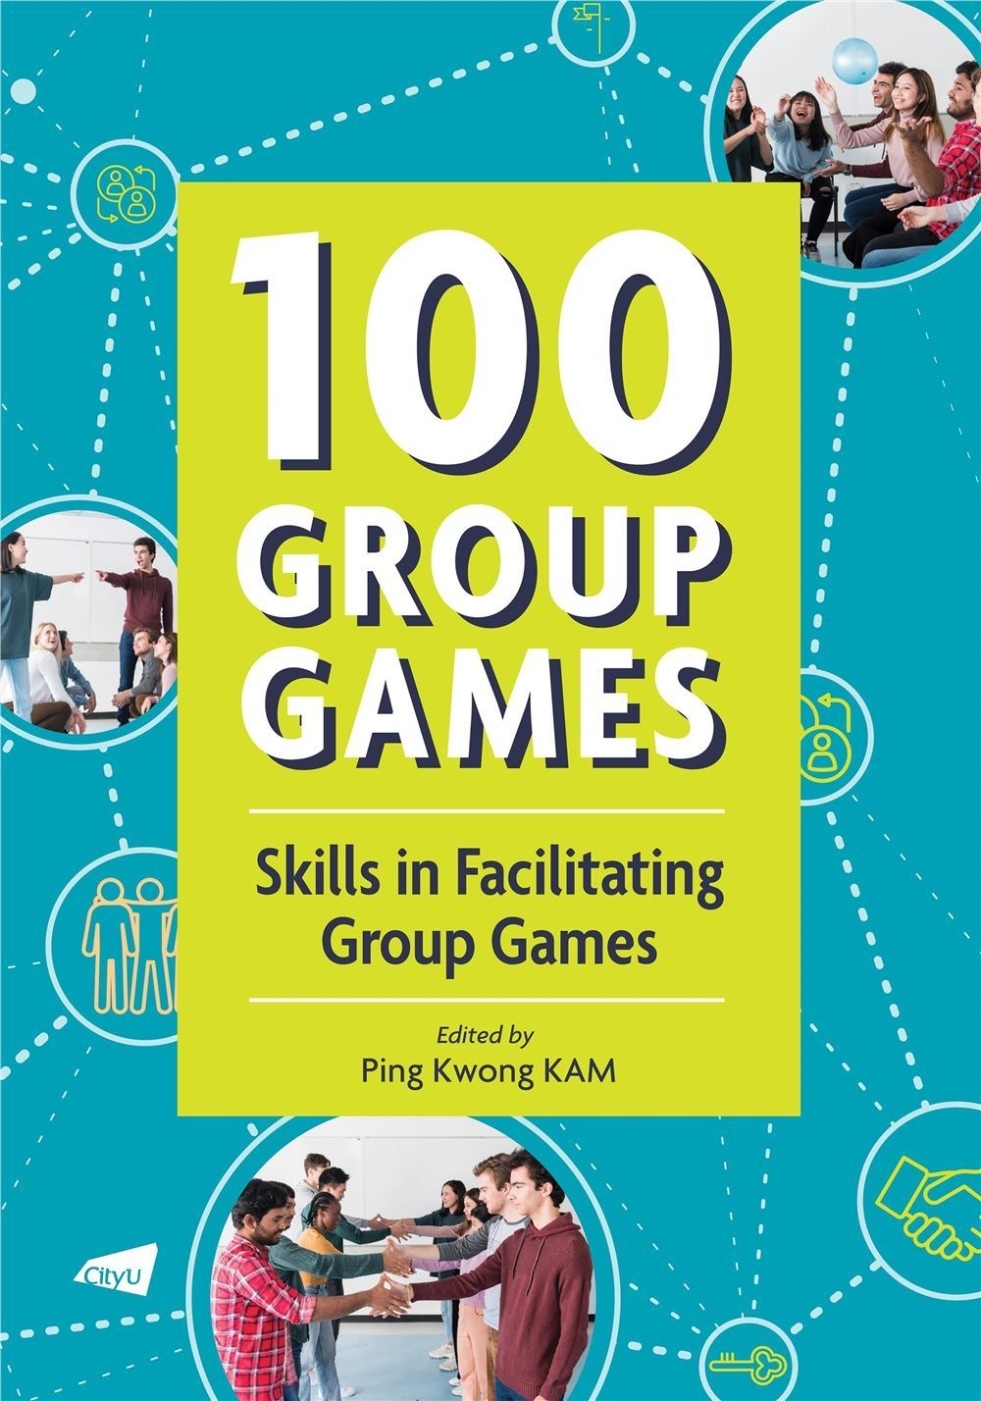 100 Group Games: Skills in Fac...